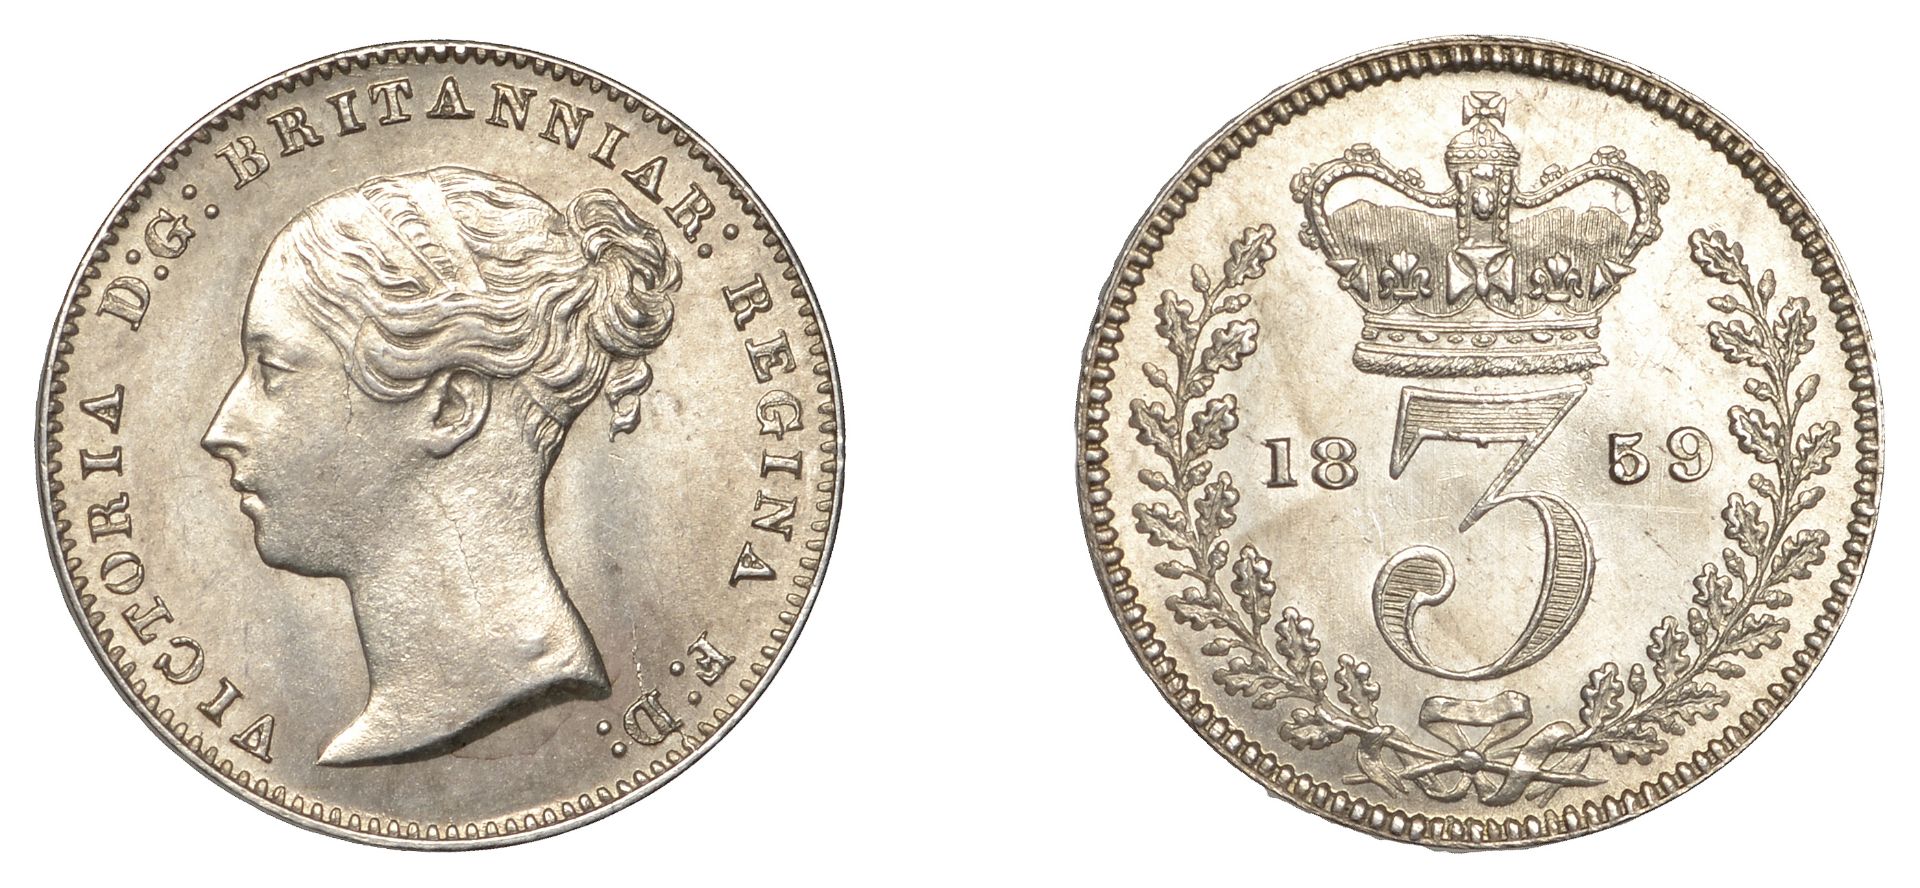 Victoria (1837-1901), Threepence, 1859 (ESC 3394; S 3914). About mint state Â£160-Â£200